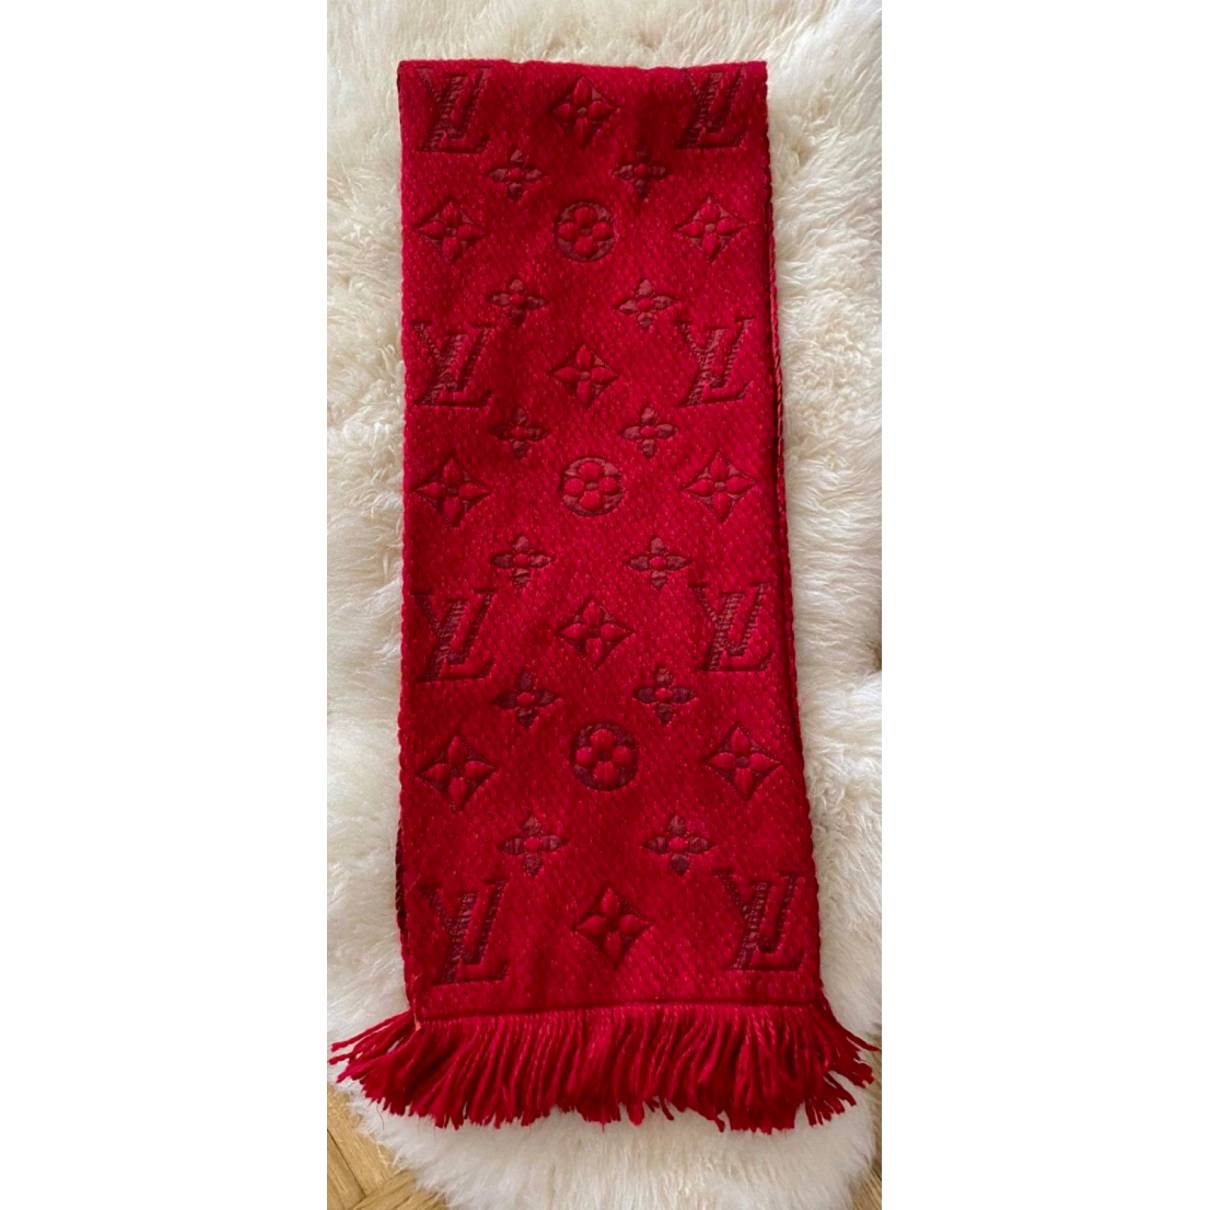 Louis Vuitton - Authenticated Logomania Scarf - Wool Red for Women, Very Good Condition